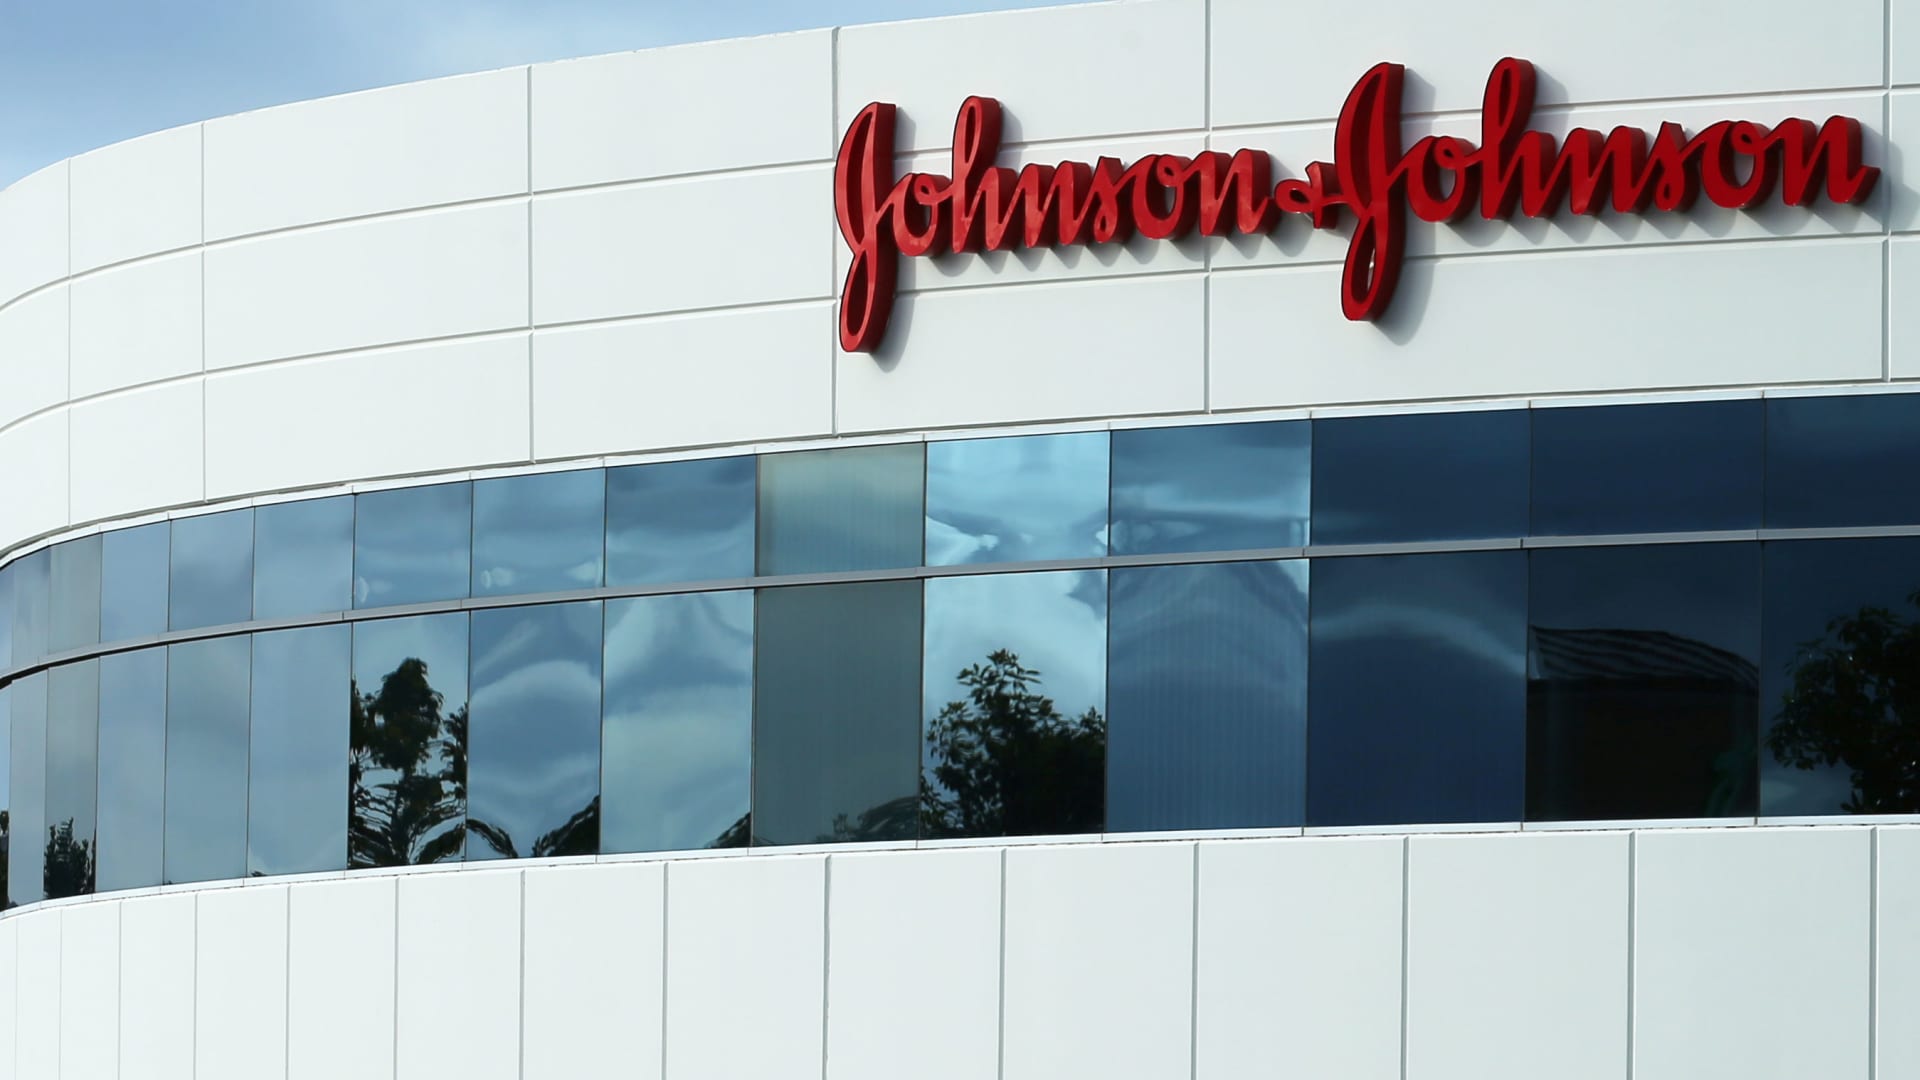 J&J’s strong quarter was amplified by new details around its big Kenvue consumer unit stake